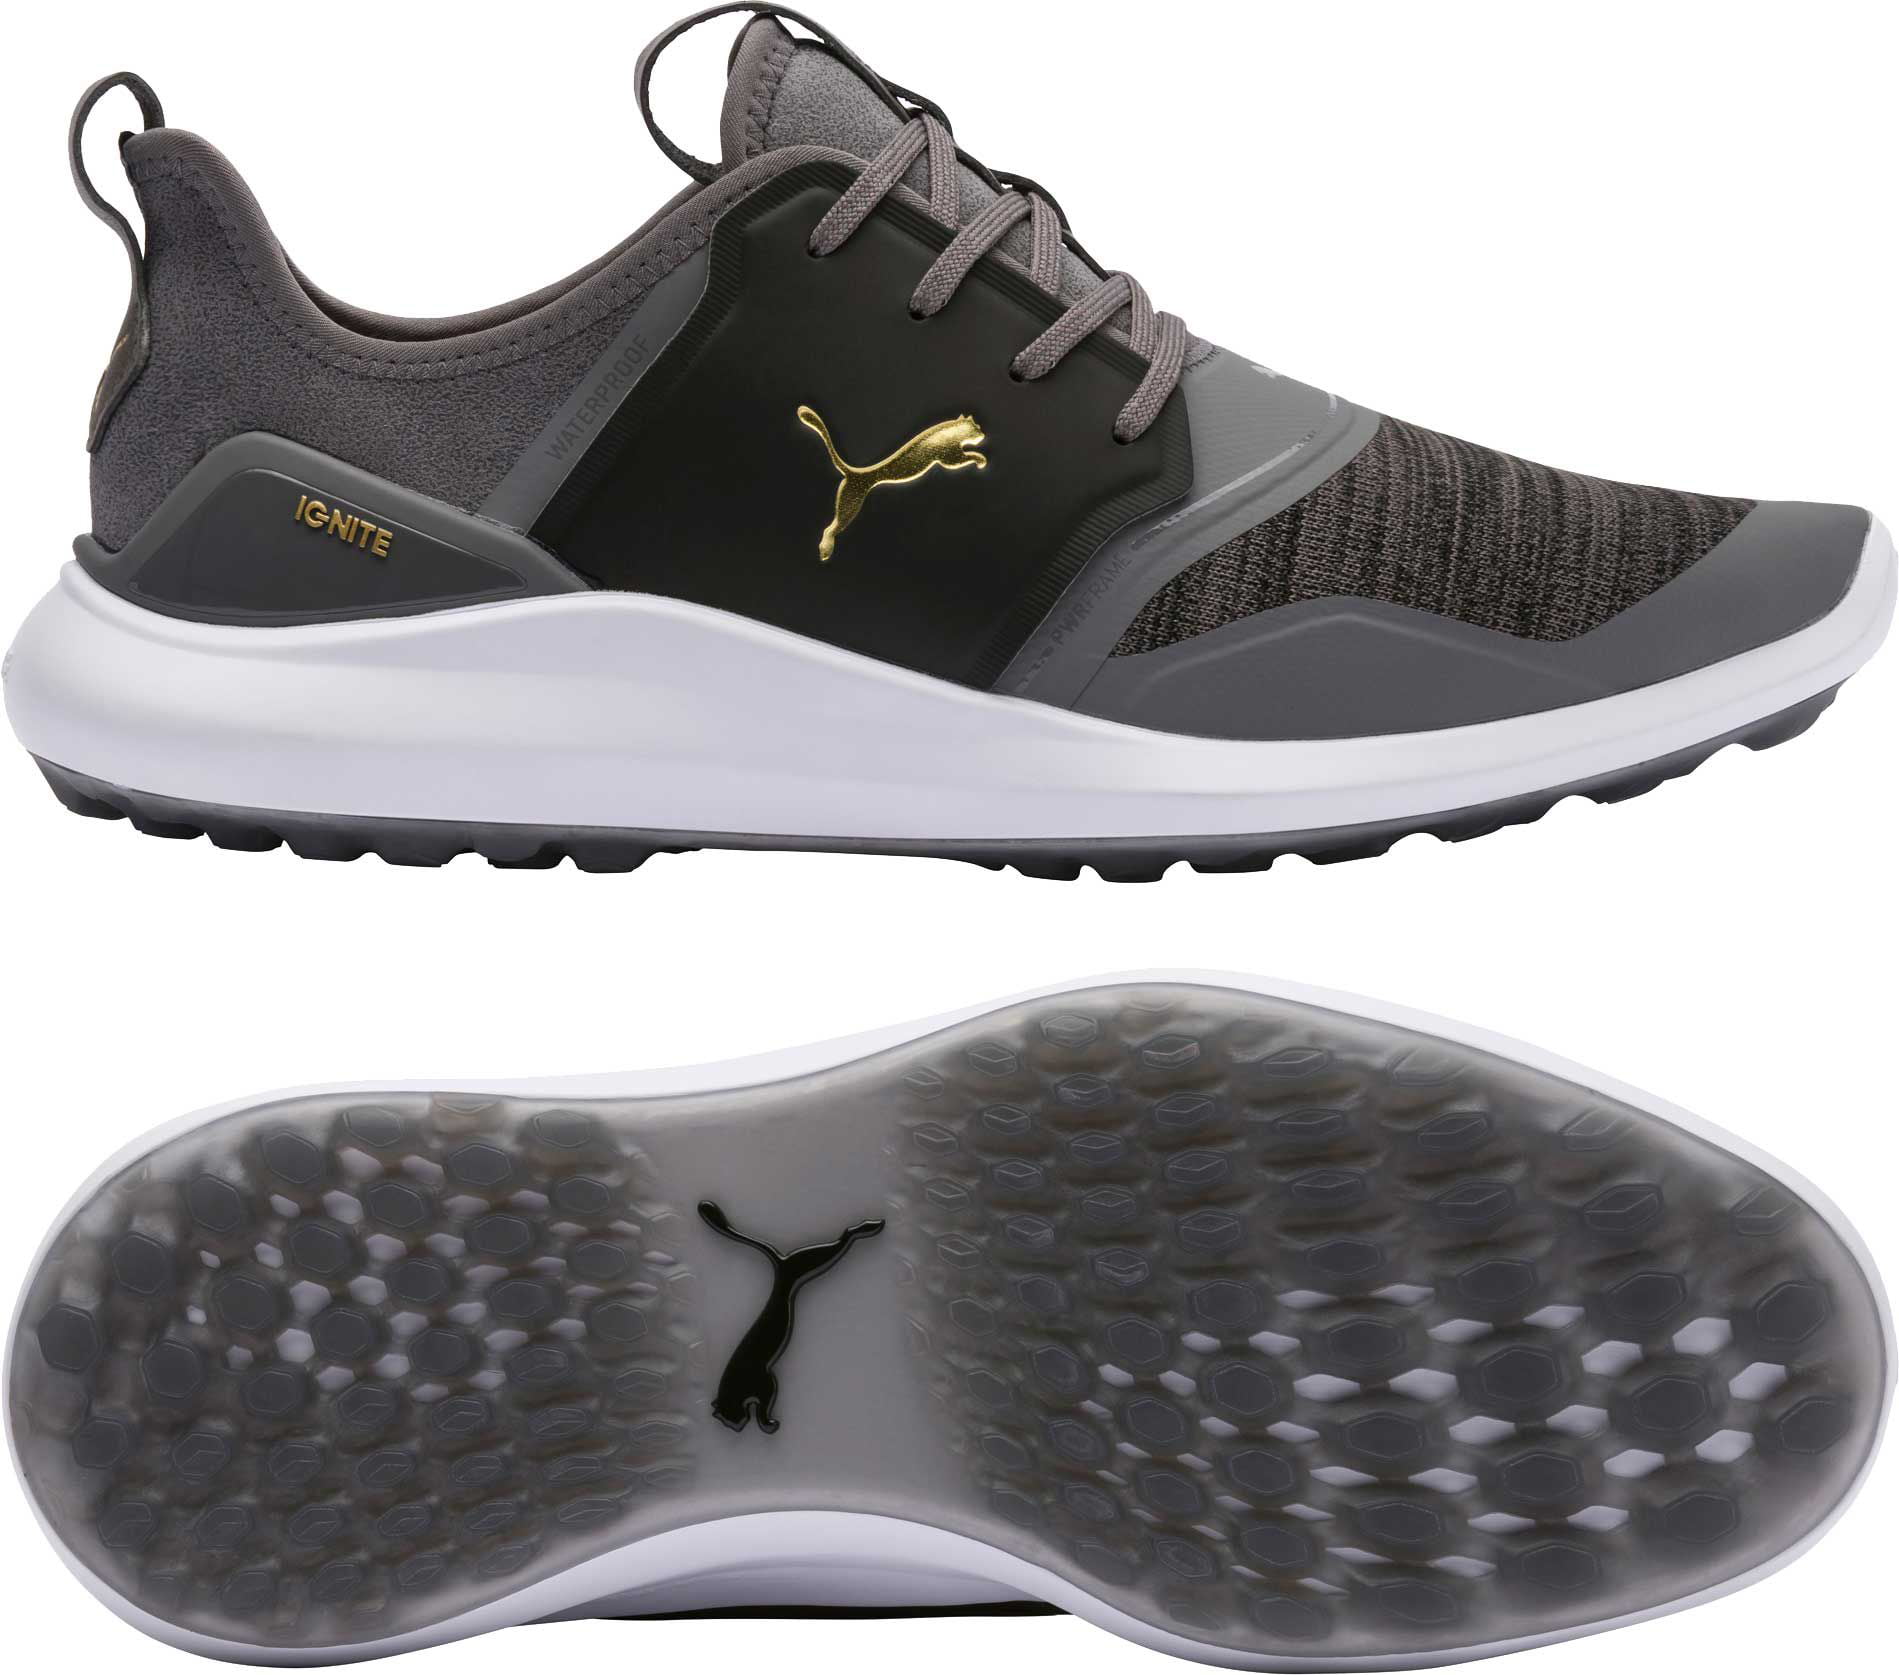 How much are puma ignite golf shoes?